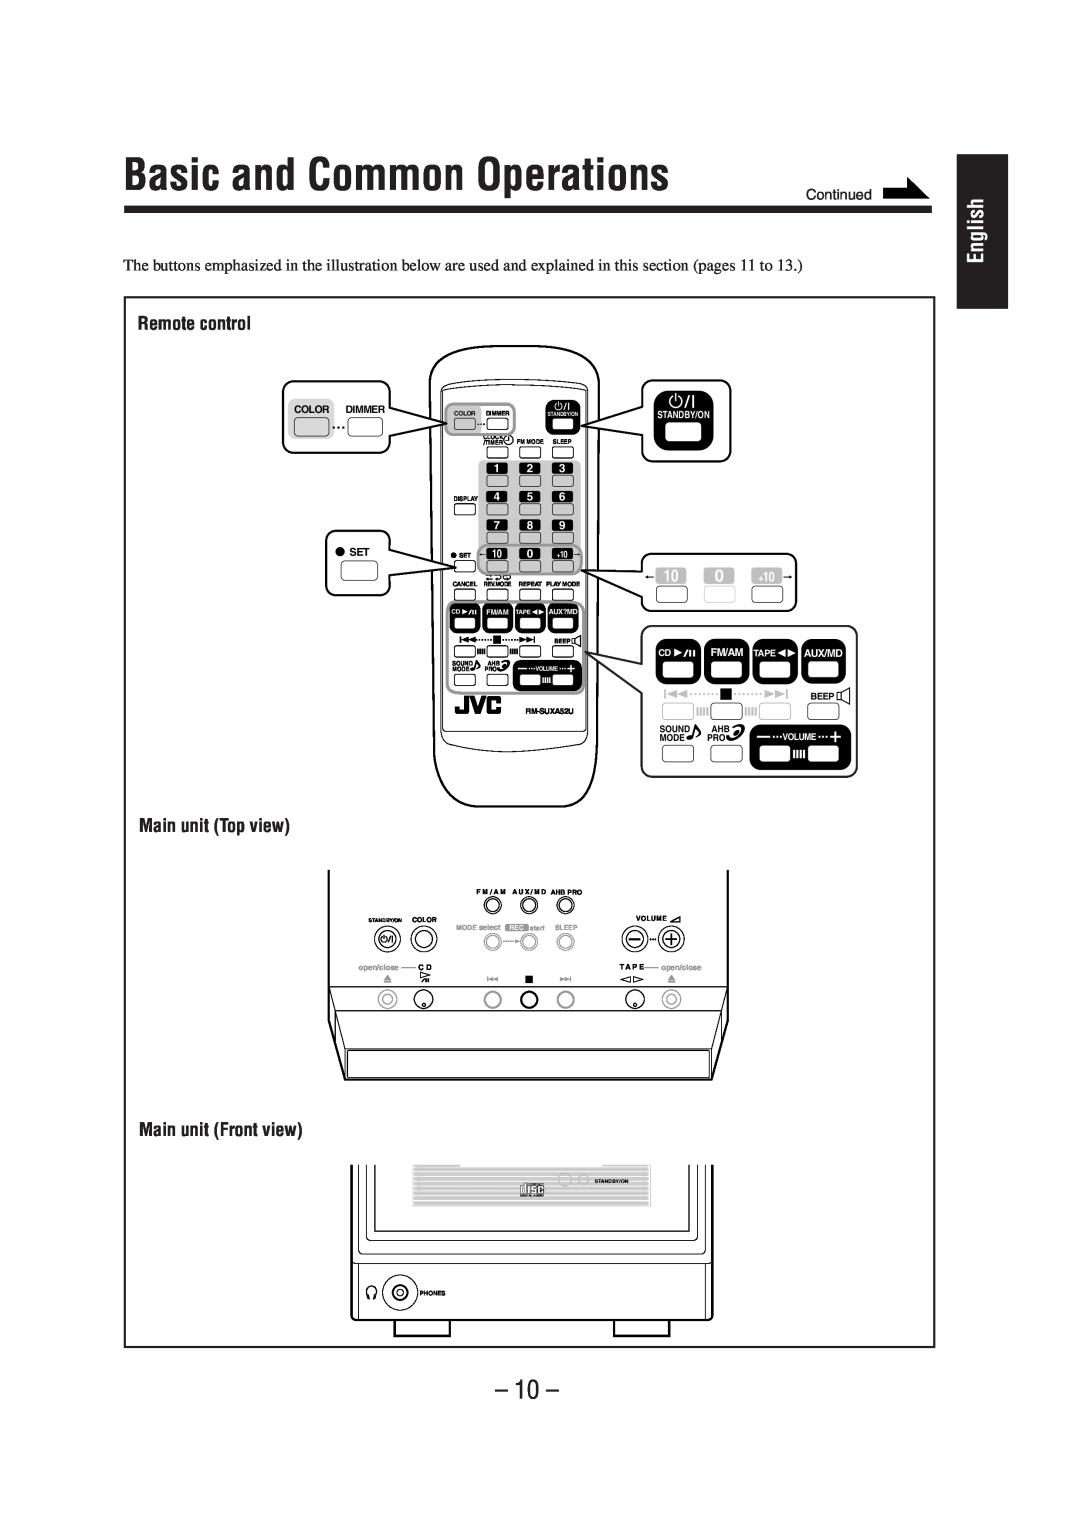 JVC UX-A52 Basic and Common Operations, Main unit Top view, Main unit Front view, English, Remote control, Continued, Tape 